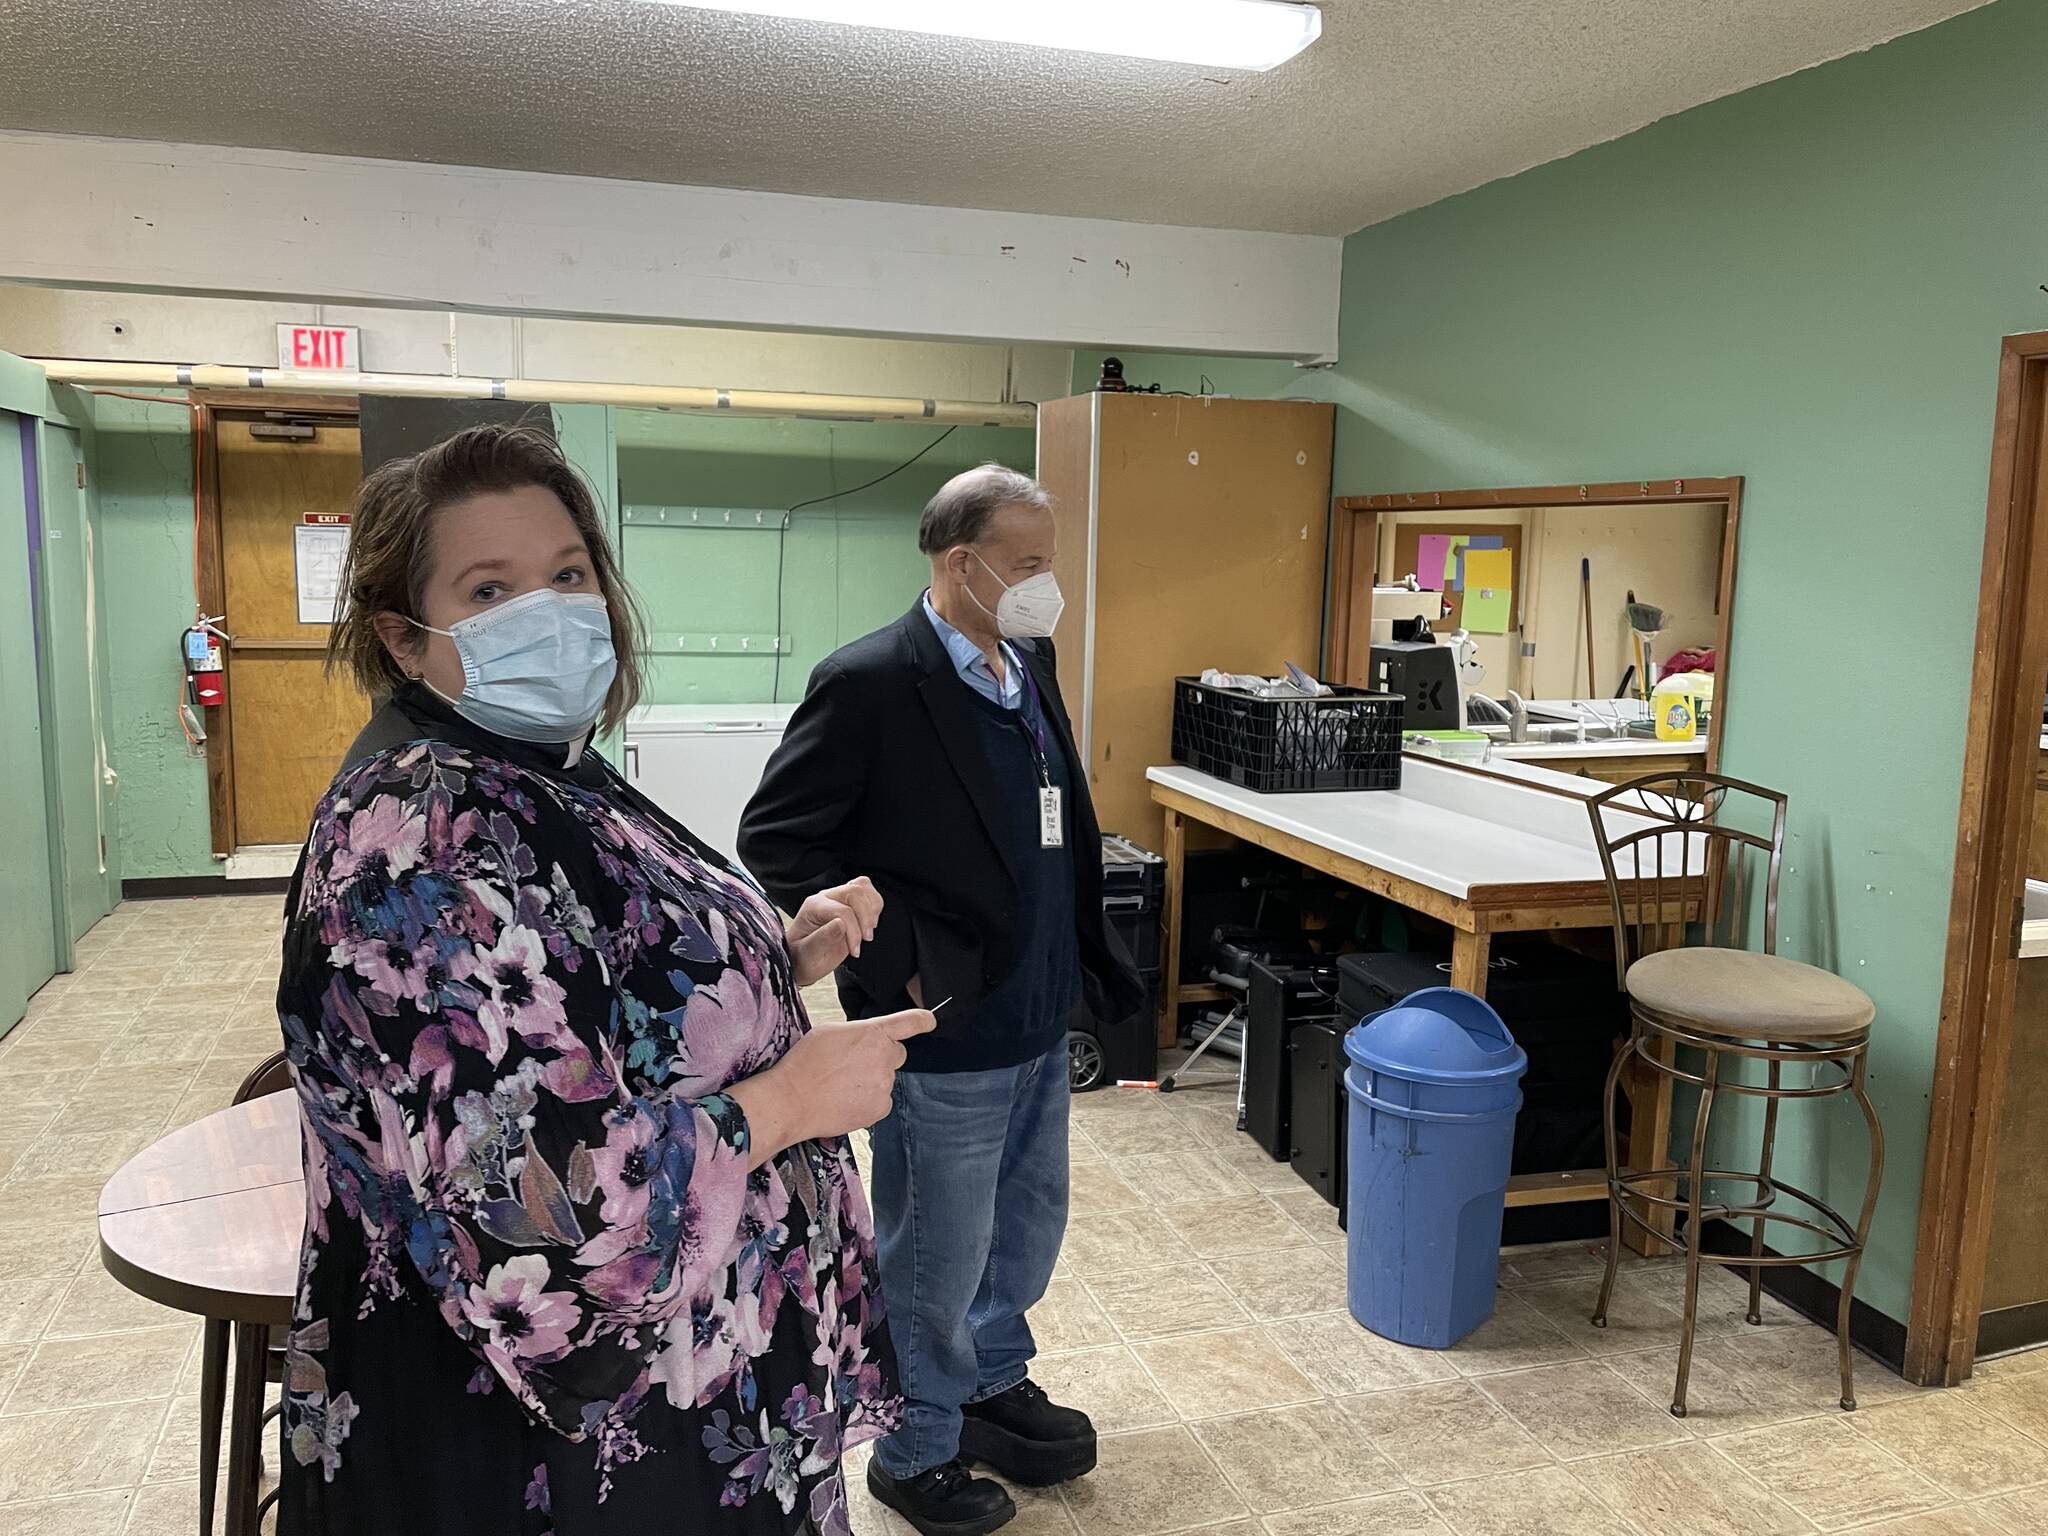 Michael S. Lockett / Juneau Empire
Pastor Karen Perkins and Brad Perkins of Resurrection Lutheran Church on Friday show where the city’s warming shelter would be sited if the church’s bid to host it is approved.